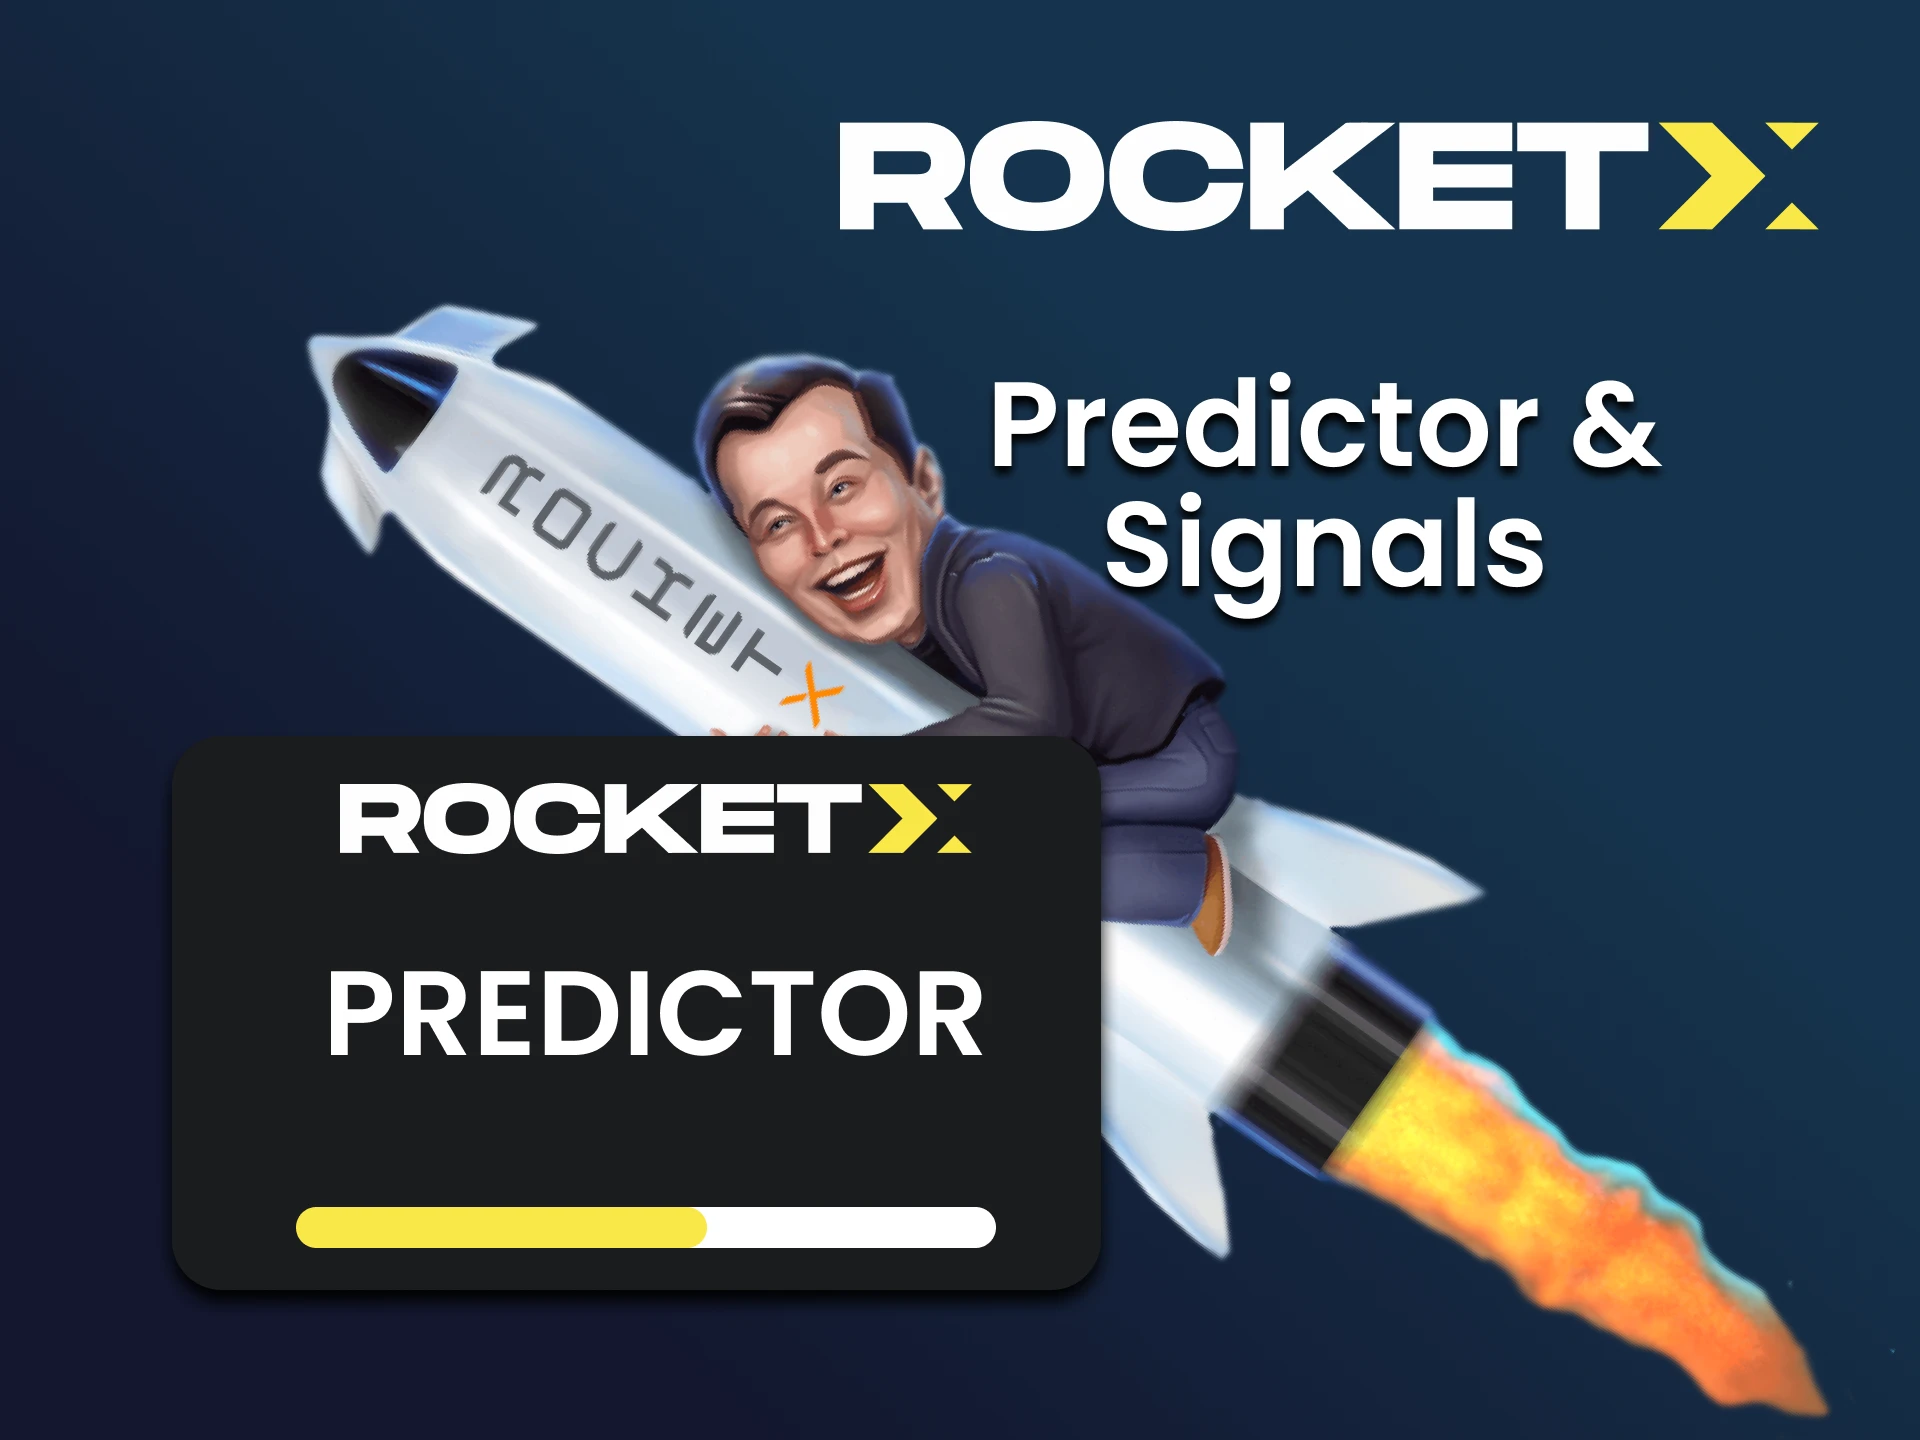 Play alone or with software in Rocket X, the choice is yours.